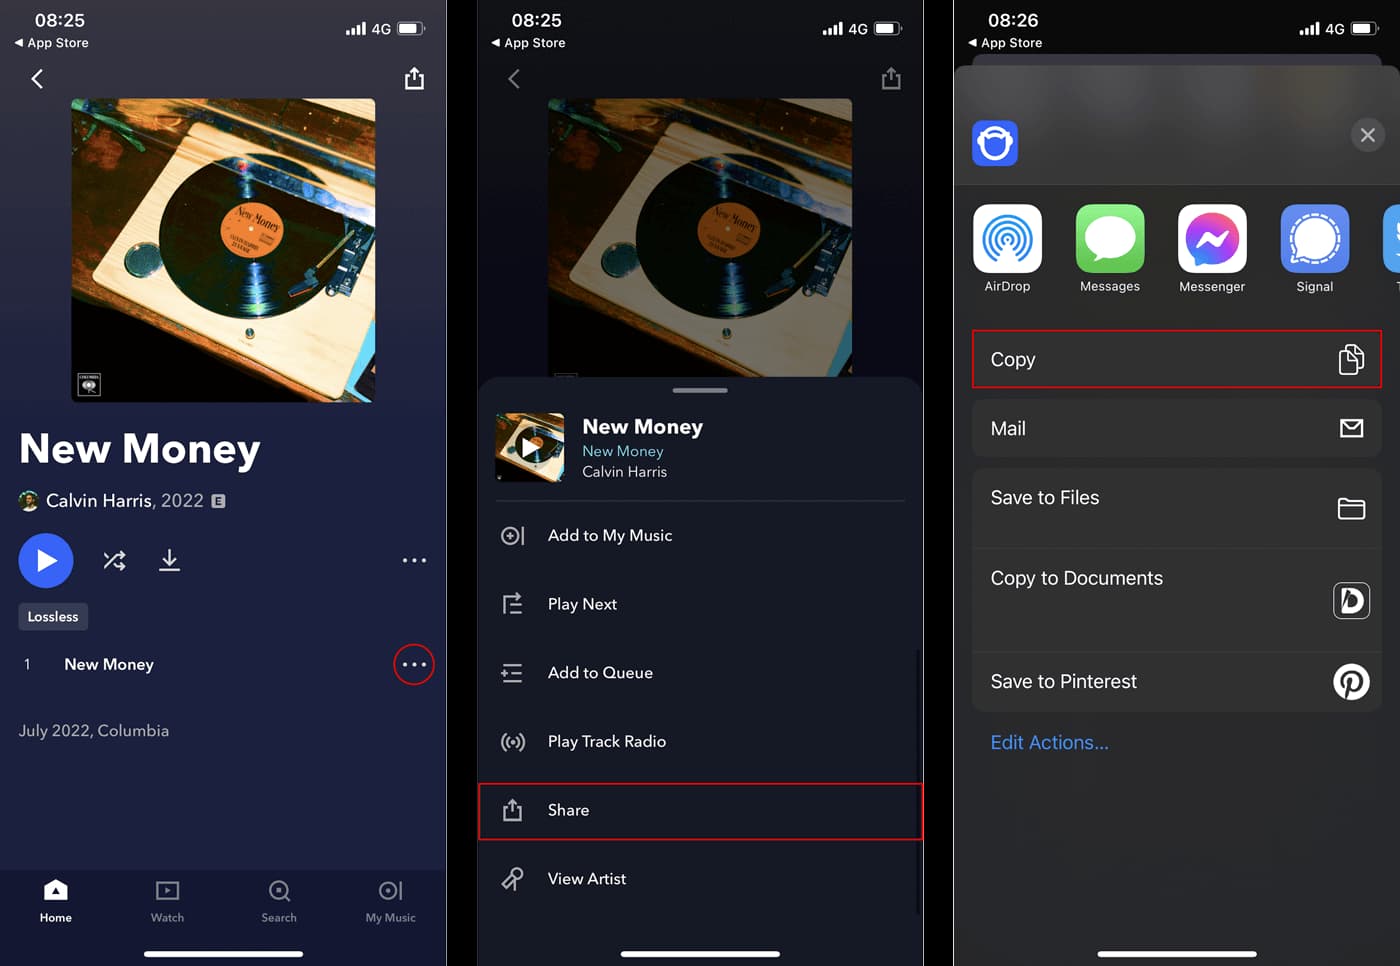 How to download songs from Napster mobile app?